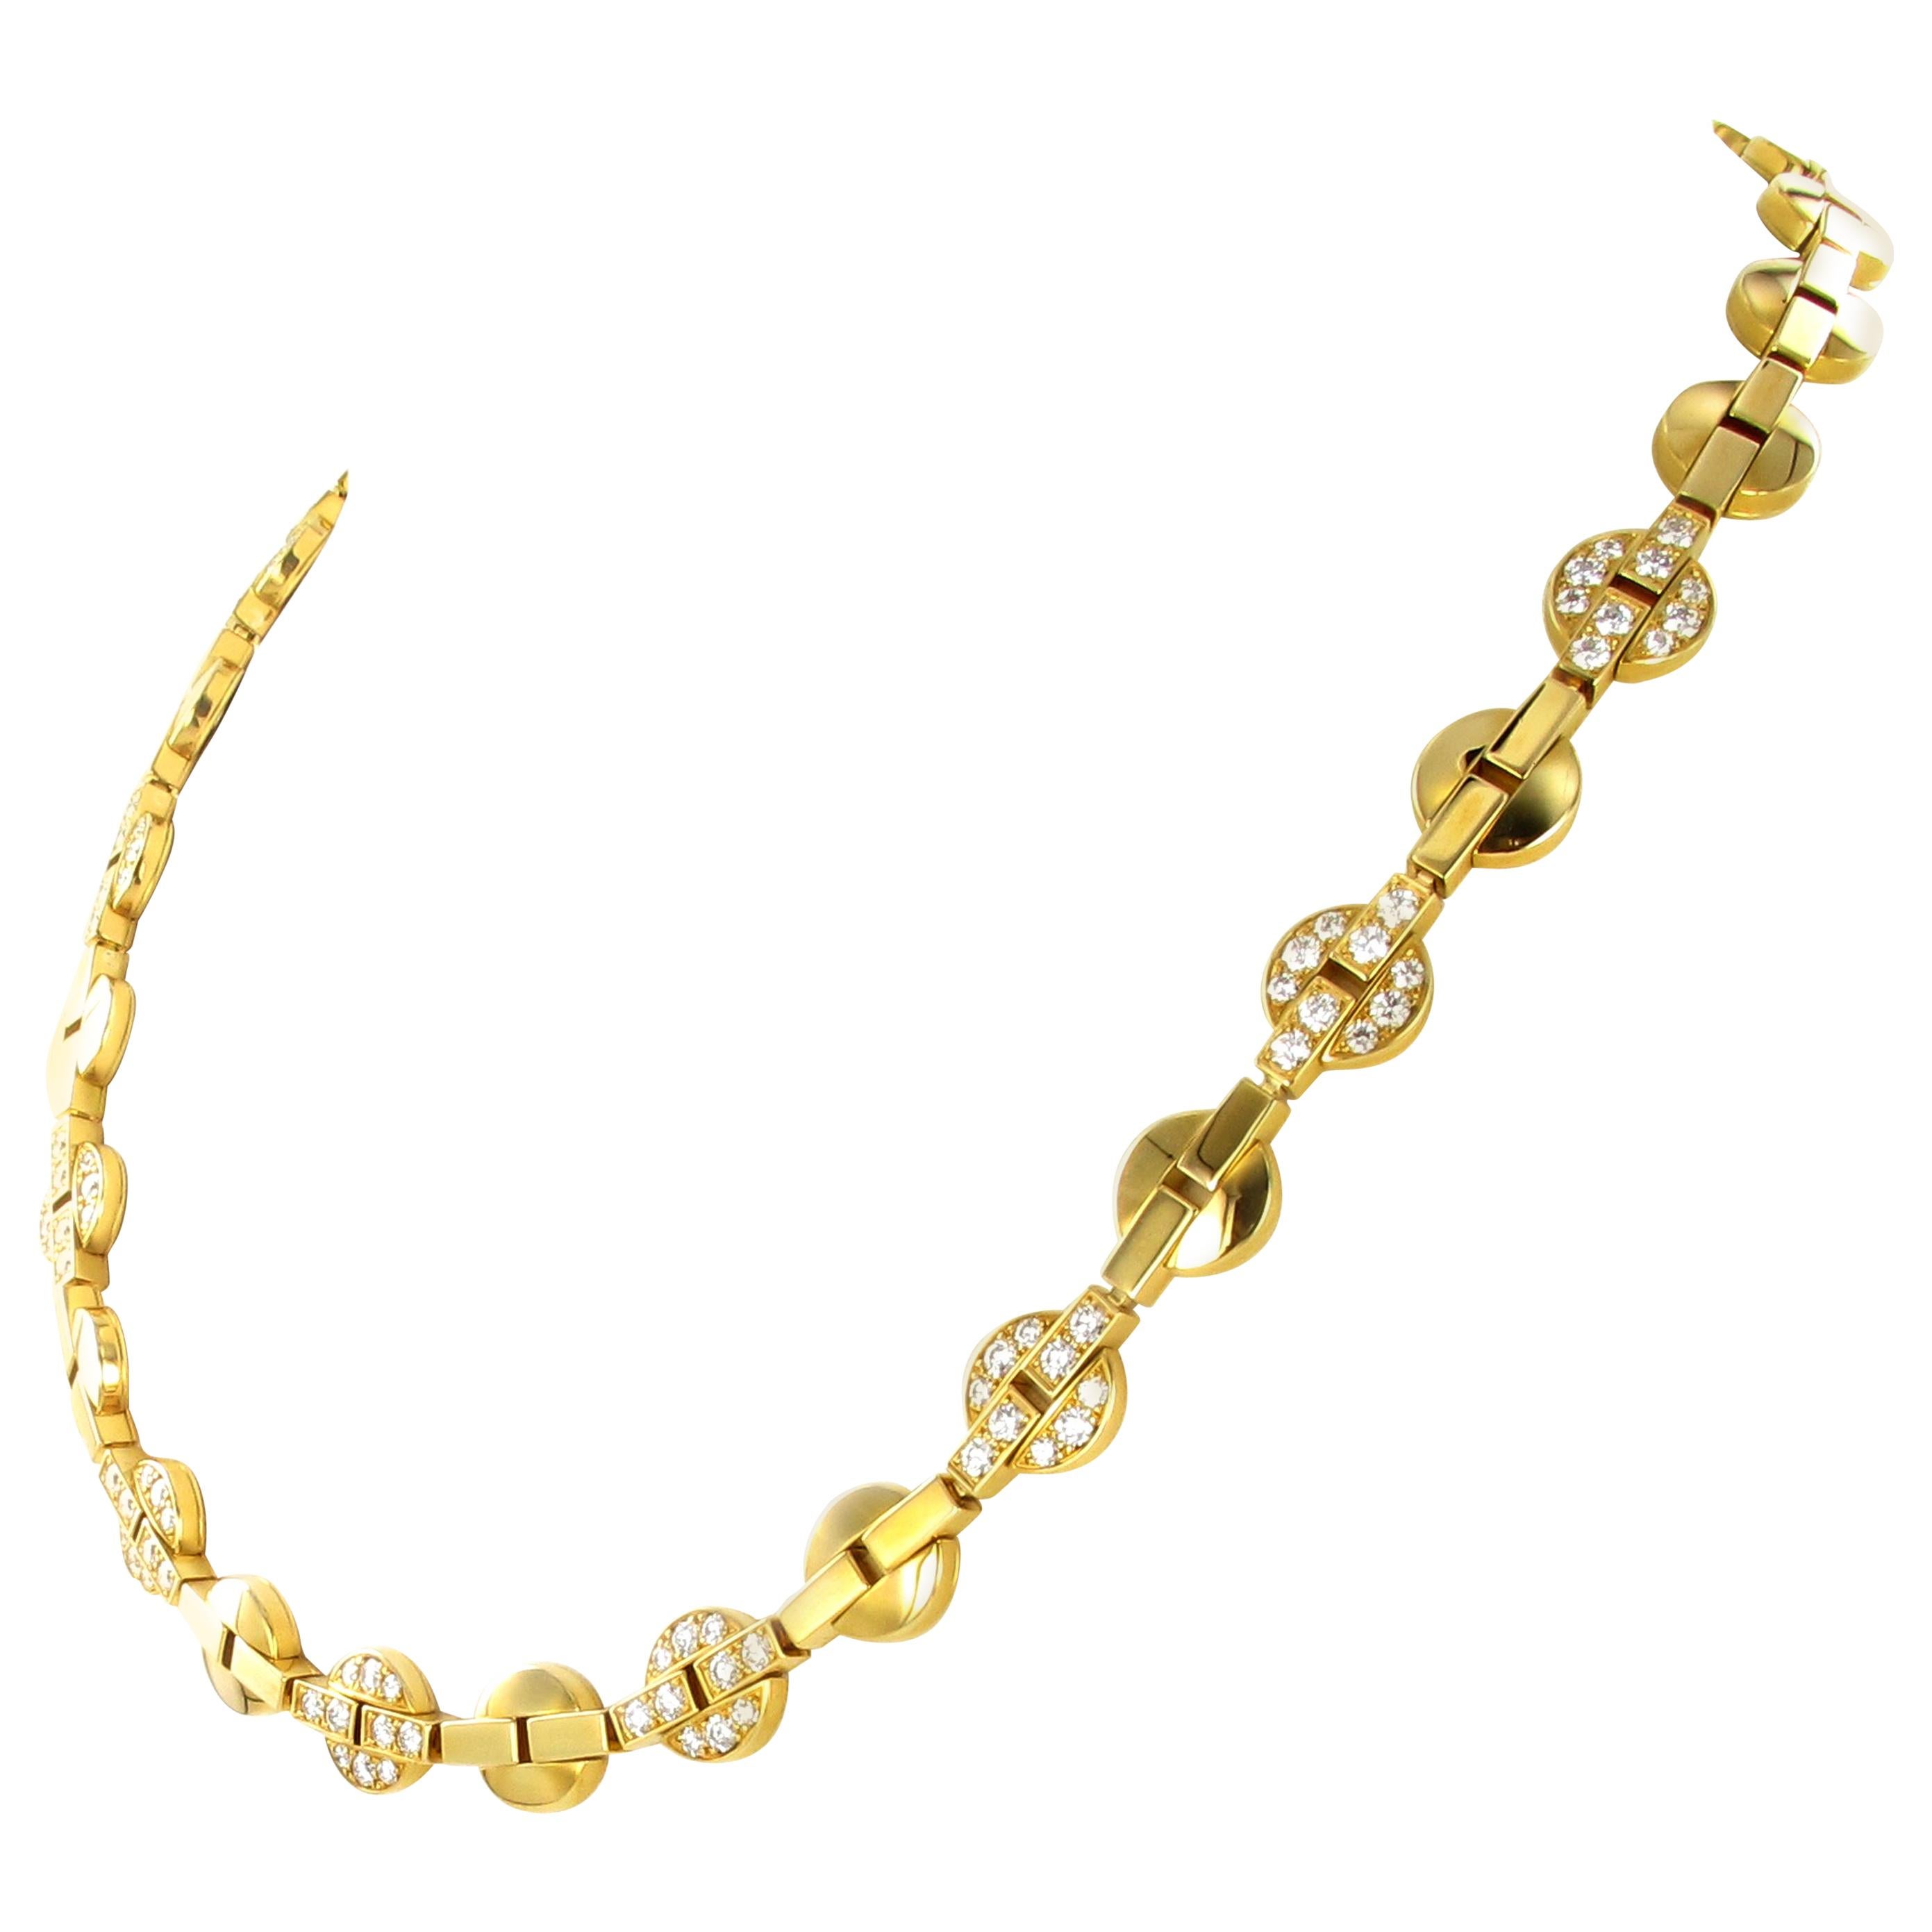 Cartier Himalia Yellow Gold Necklace with Diamonds